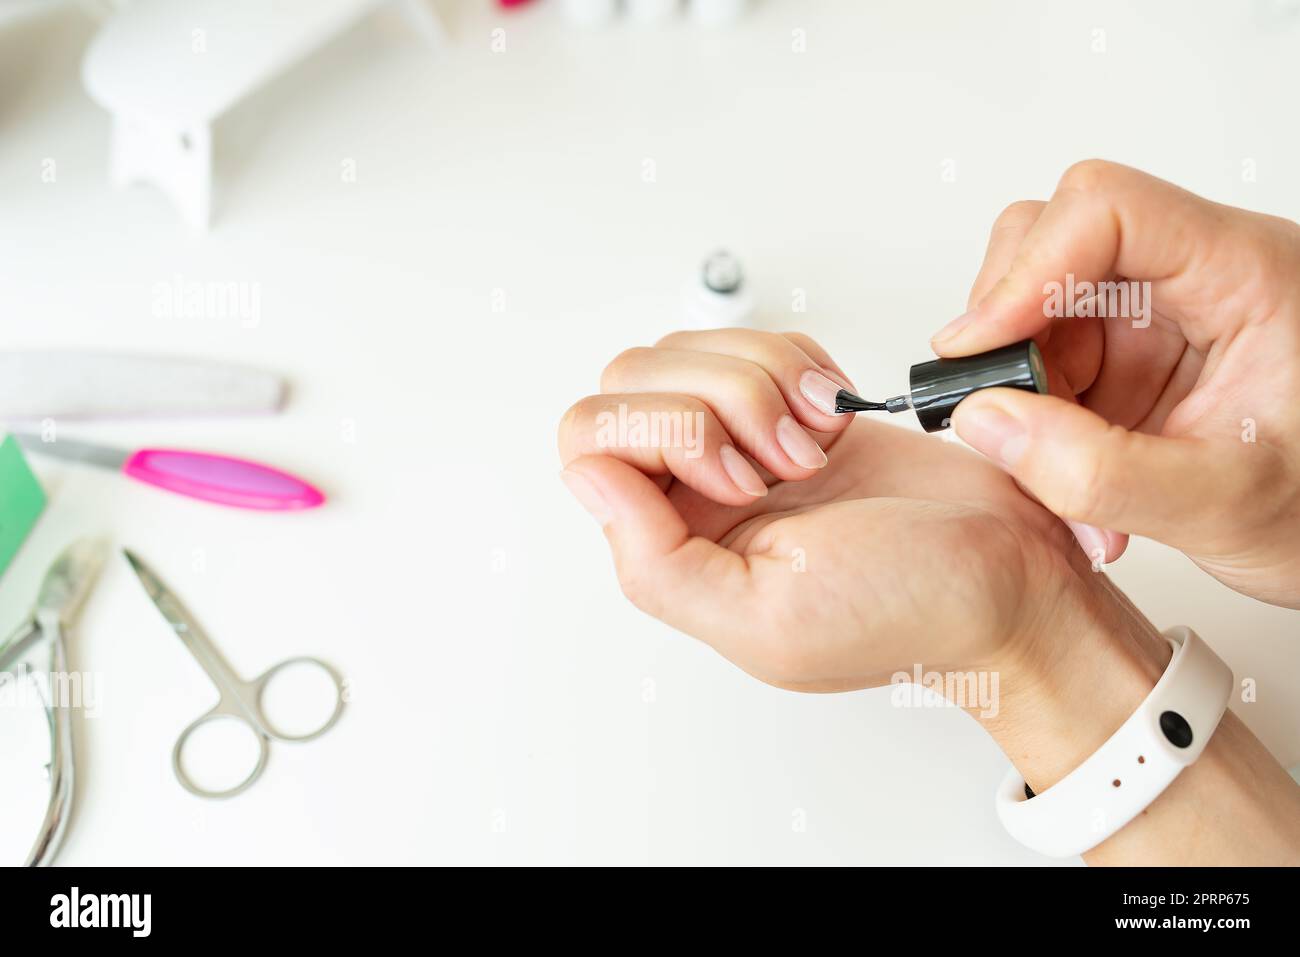 Covering nails with gel polish in a beauty salon or at home, your own master. Professional hand care. Stock Photo